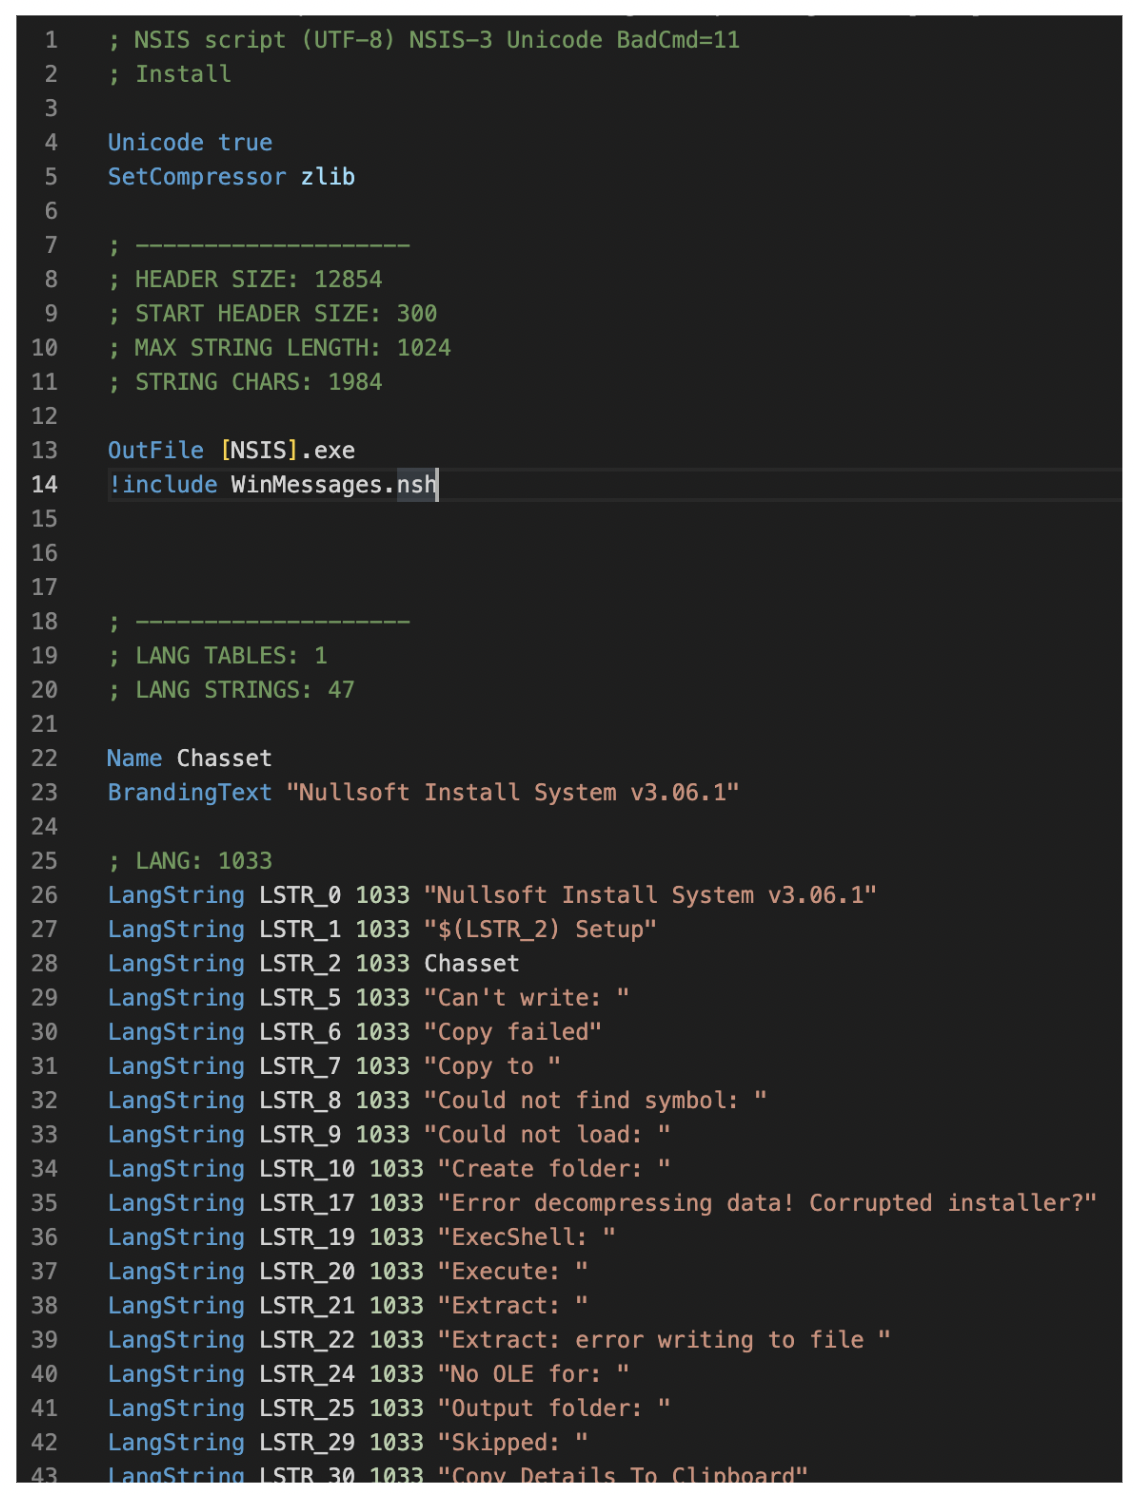 Image 1 is a screenshot of many lines of code the NSIS script, prepared to analyze.